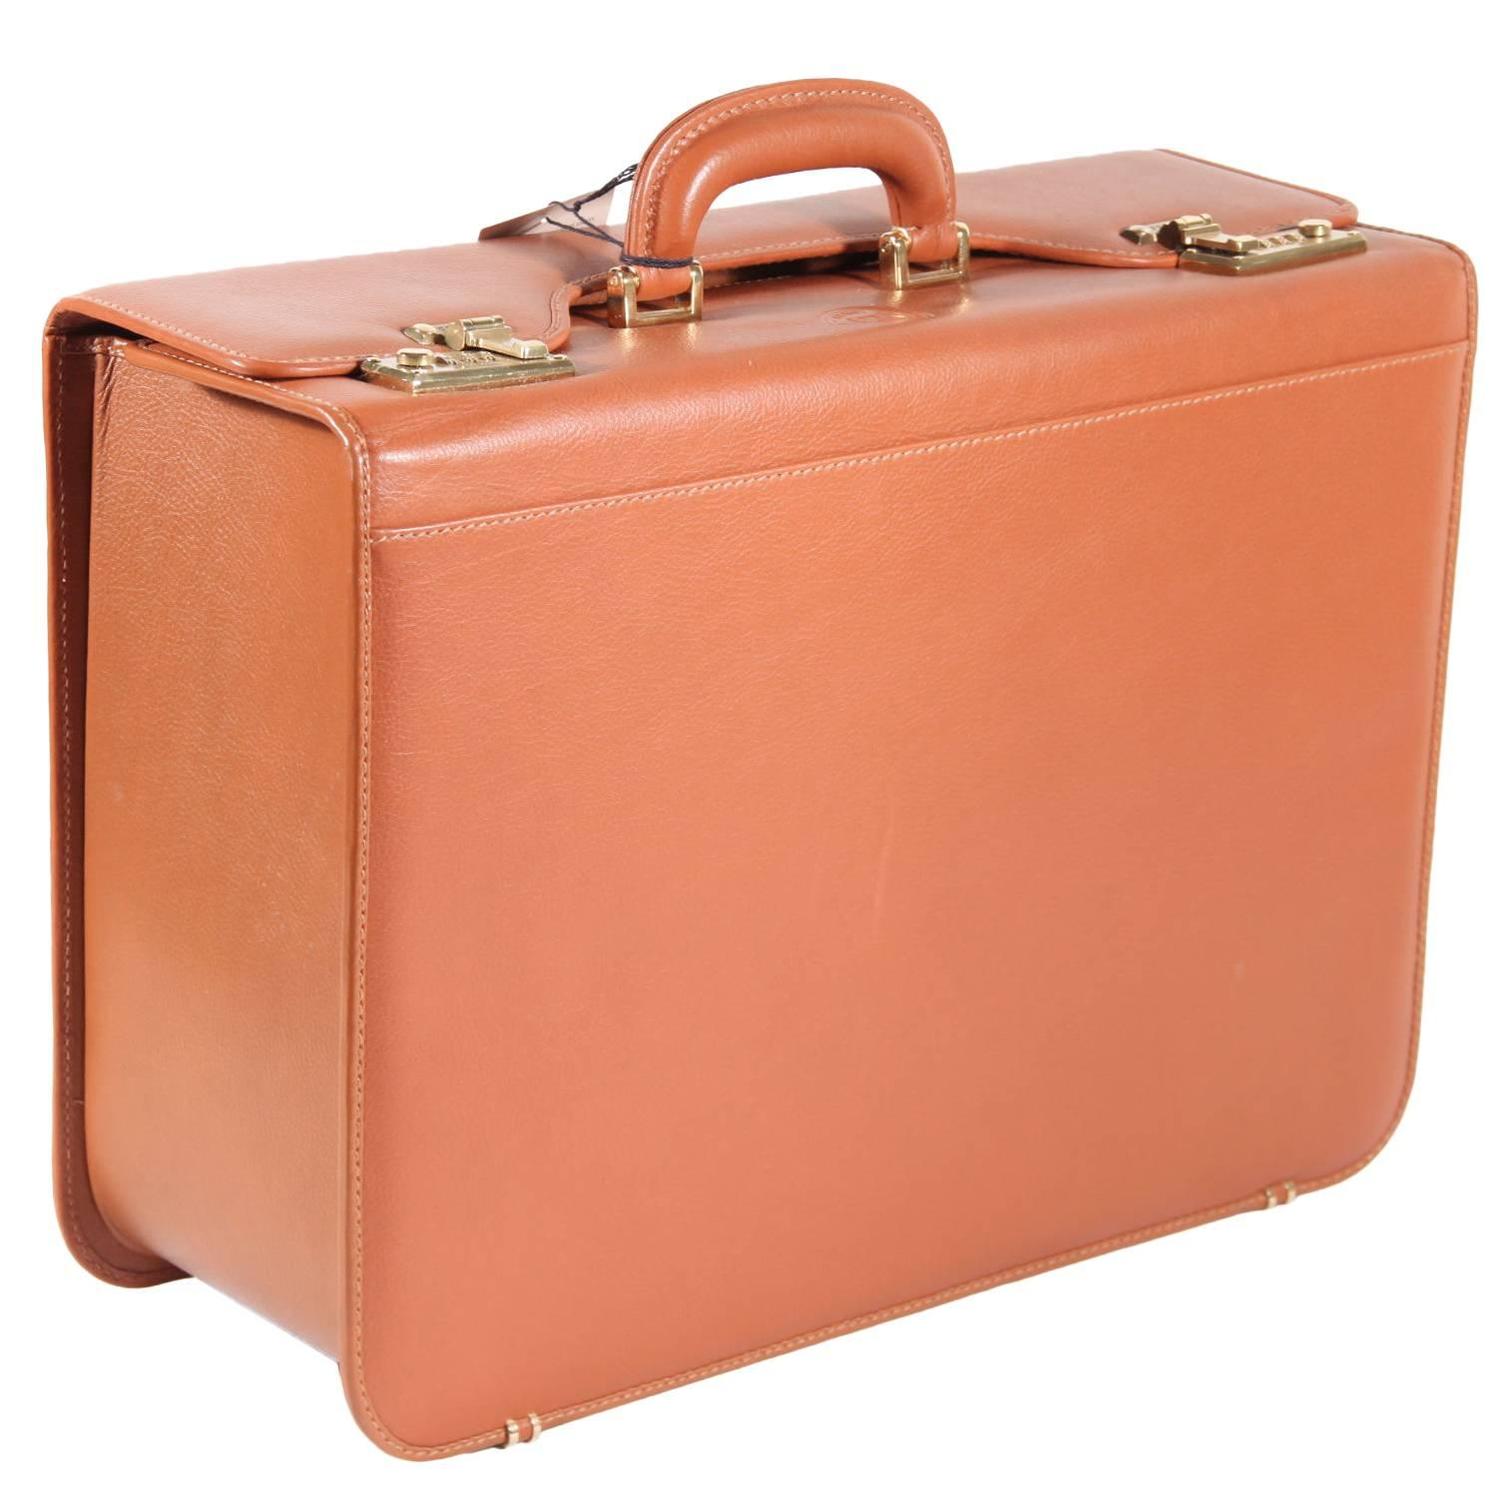 FENDI Italian VINTAGE Tan Leather Carry On TRAVEL BAG Suitcase BRIEFCASE For Sale at 1stdibs